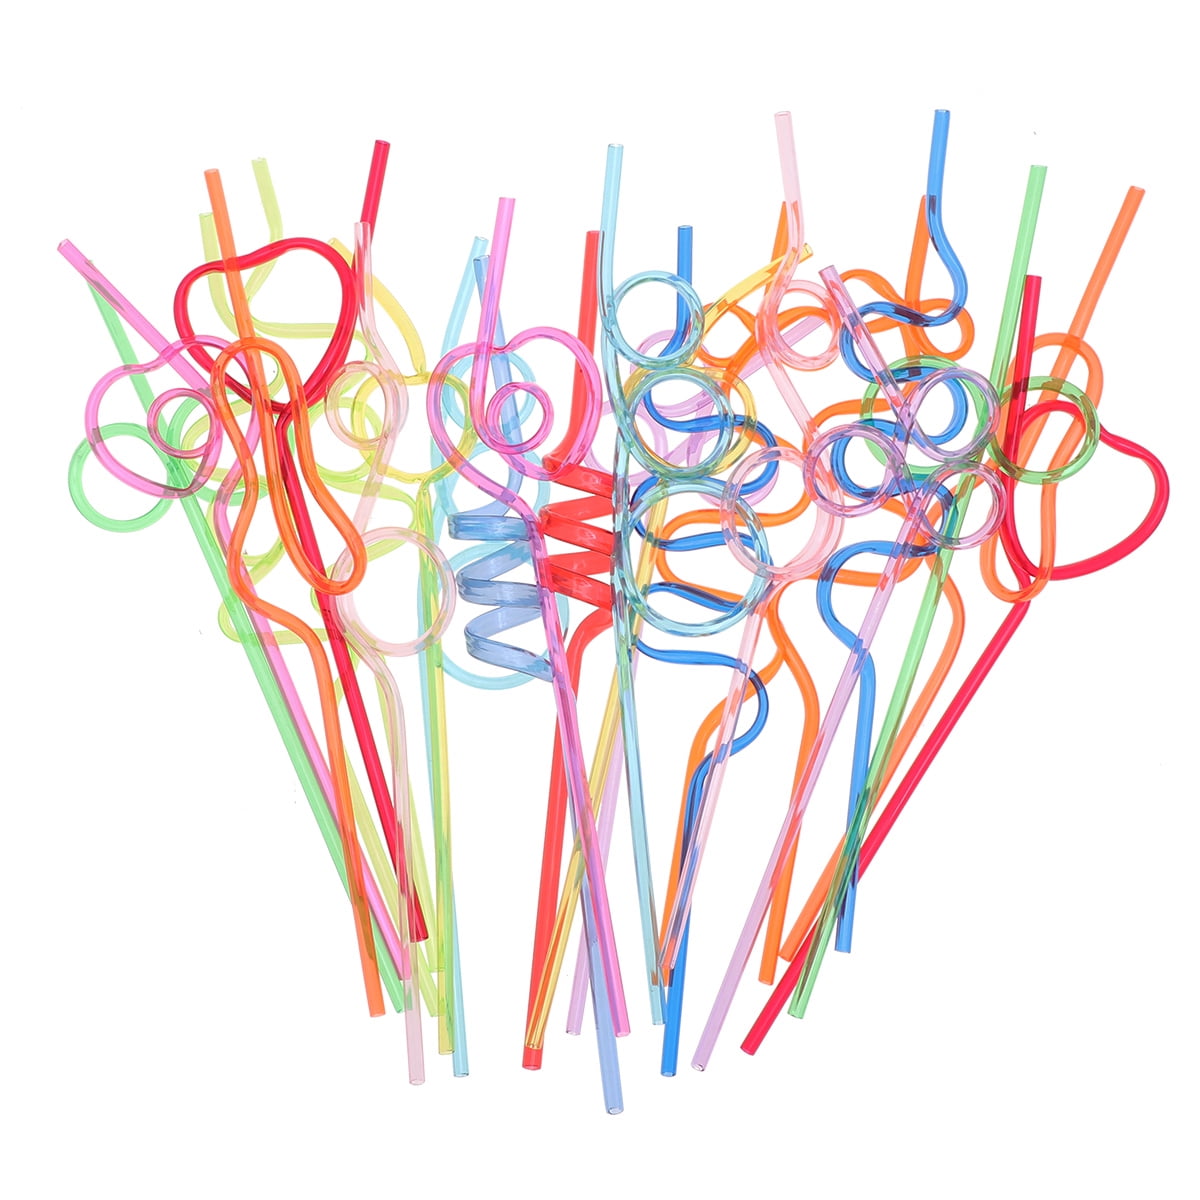 KIDS CRAZY STRAWS COLOURED NOVELTY 3,6,9,12 Twisty Party Bag Fillers Drinking UK 